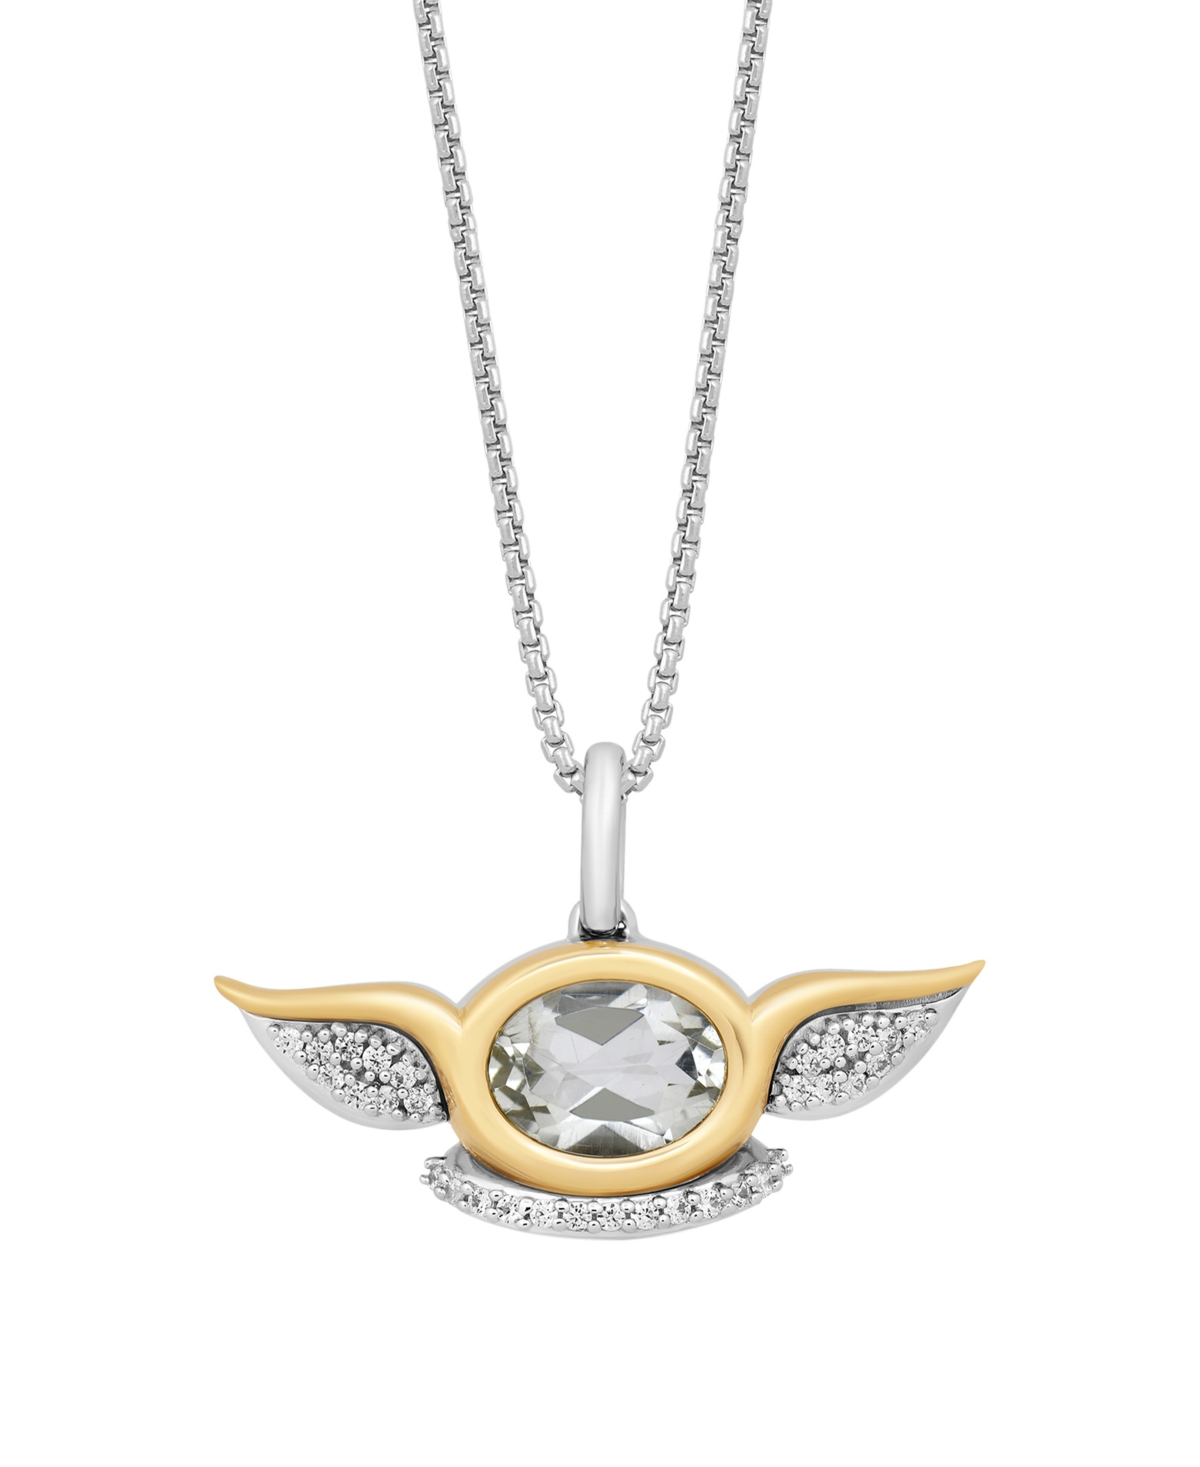 Star Wars Grogua Diamond And Green Quartz Pendant Necklace (1/10 Ct. T.w.) In 10k Yellow Gold And Sterling Sil In Two Tone